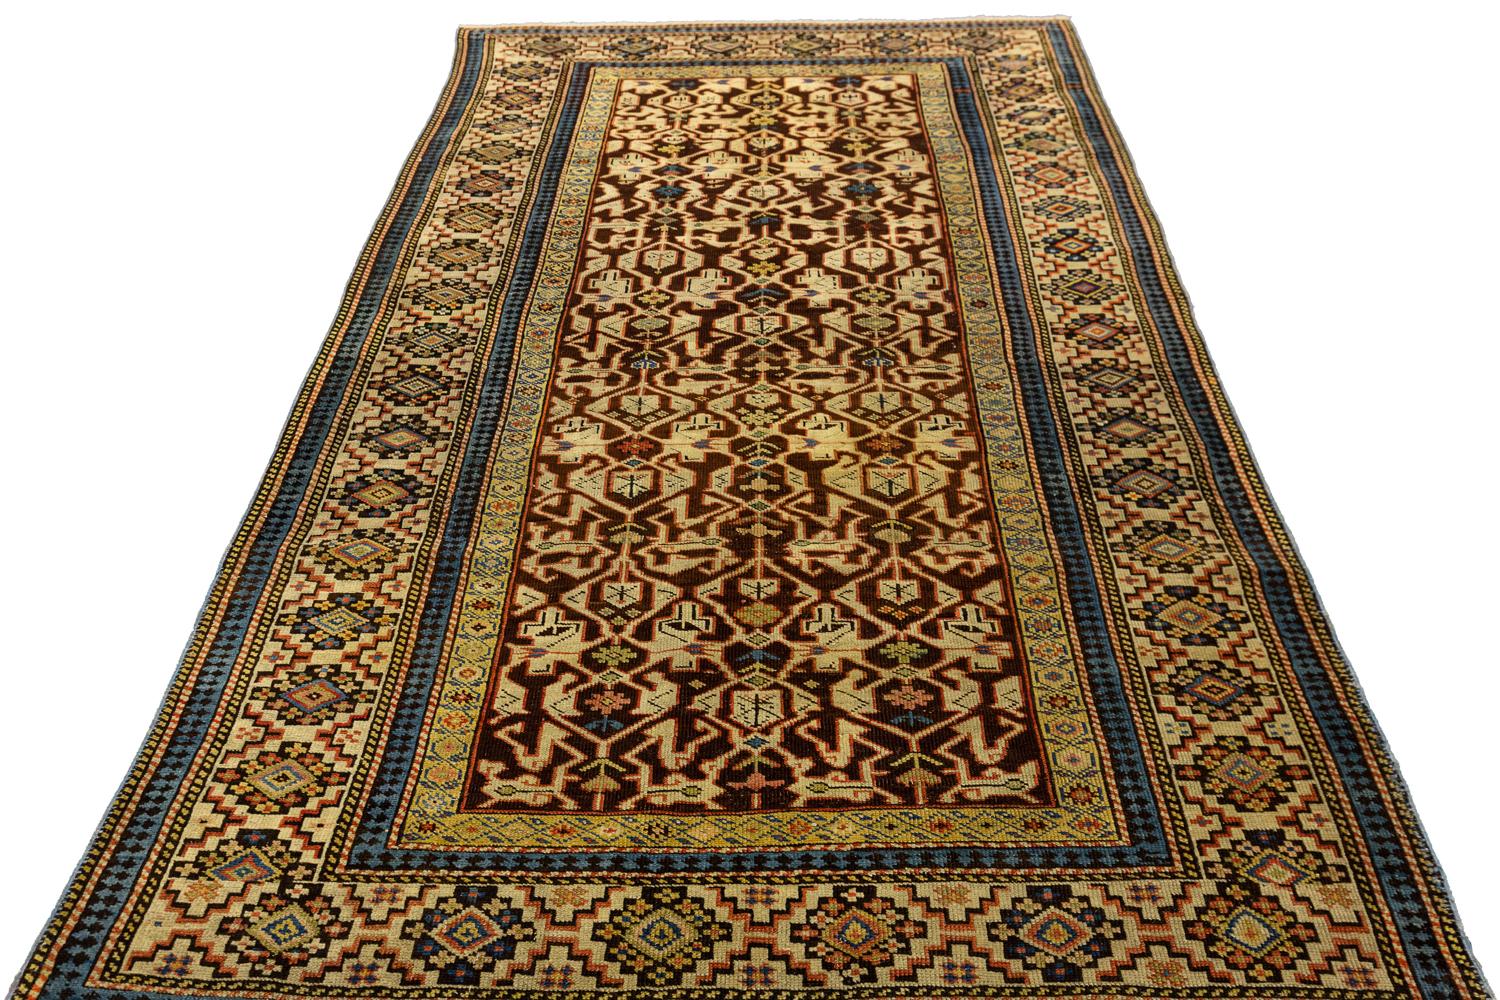 This is a rare Antique Caucasian Konakend rug with an amazing bold design and striking geometric shapes. The colors are rich and vibrant, and the rug is in excellent condition. It would be a beautiful addition to any home, and would make a stunning